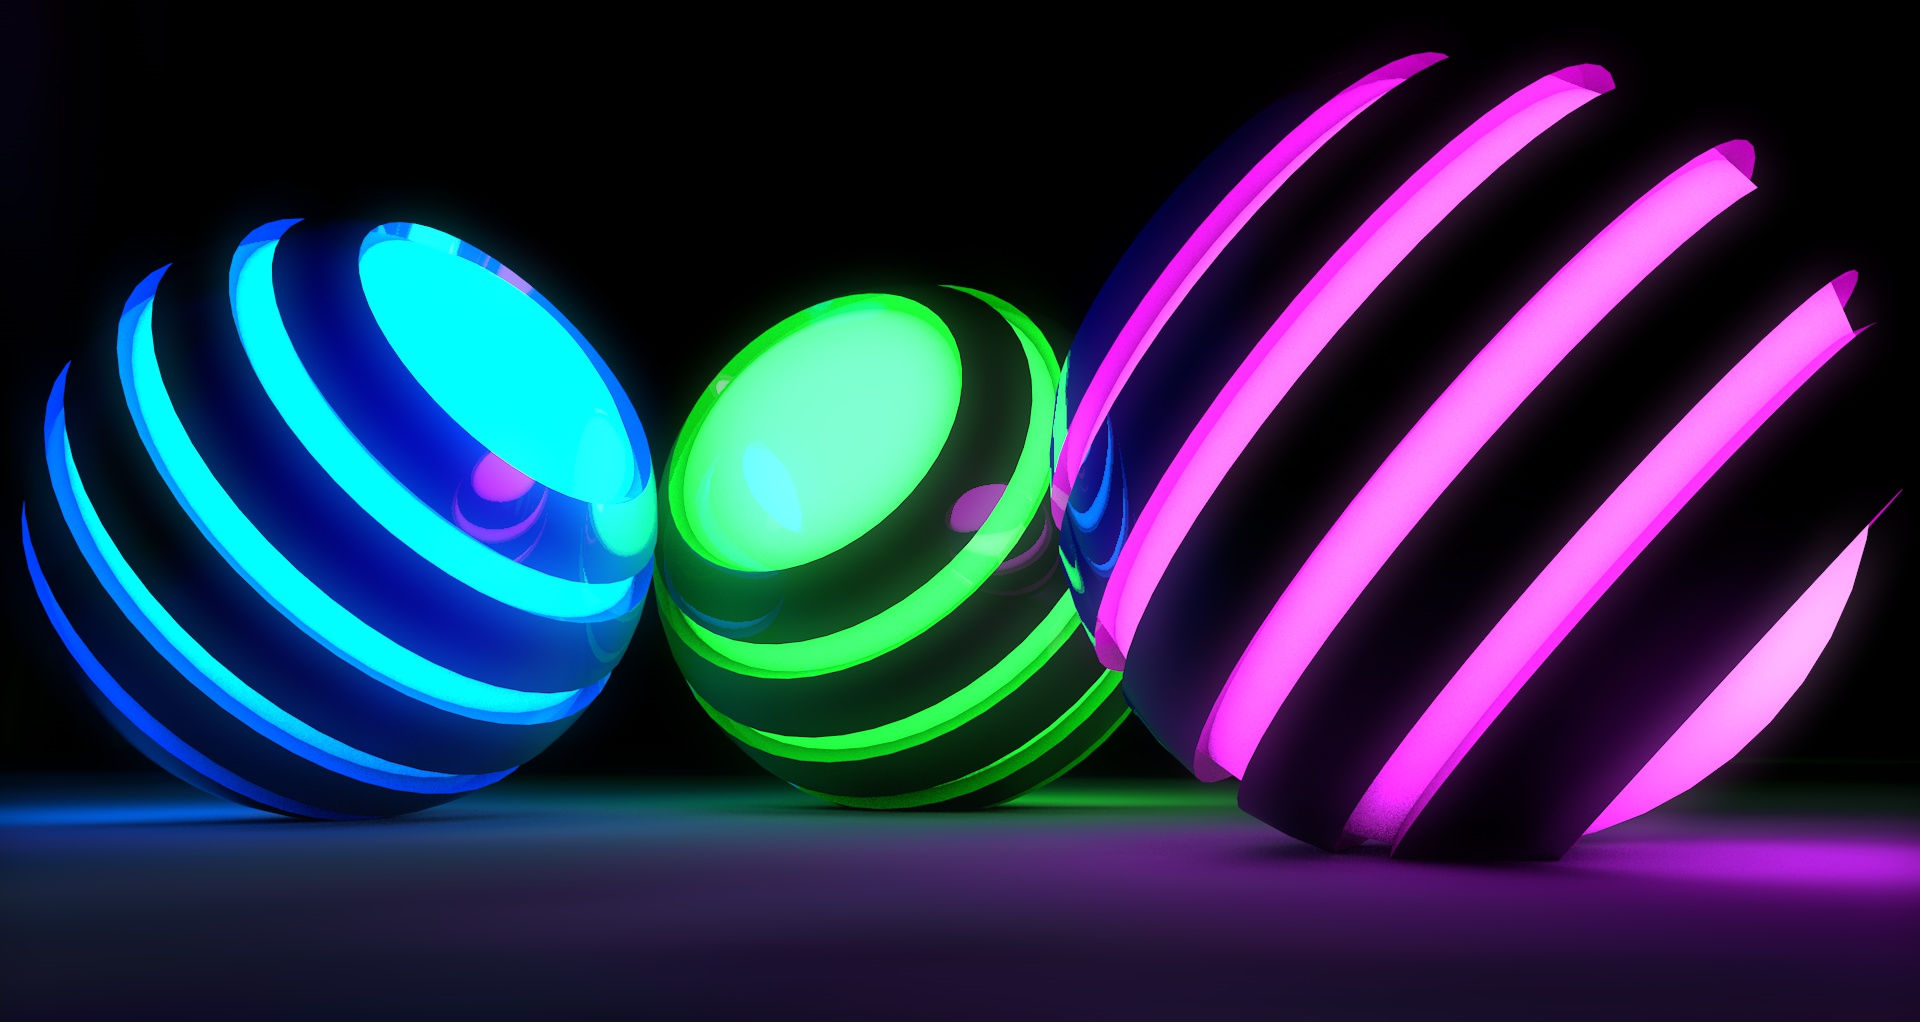 Awesome neon backgrounds